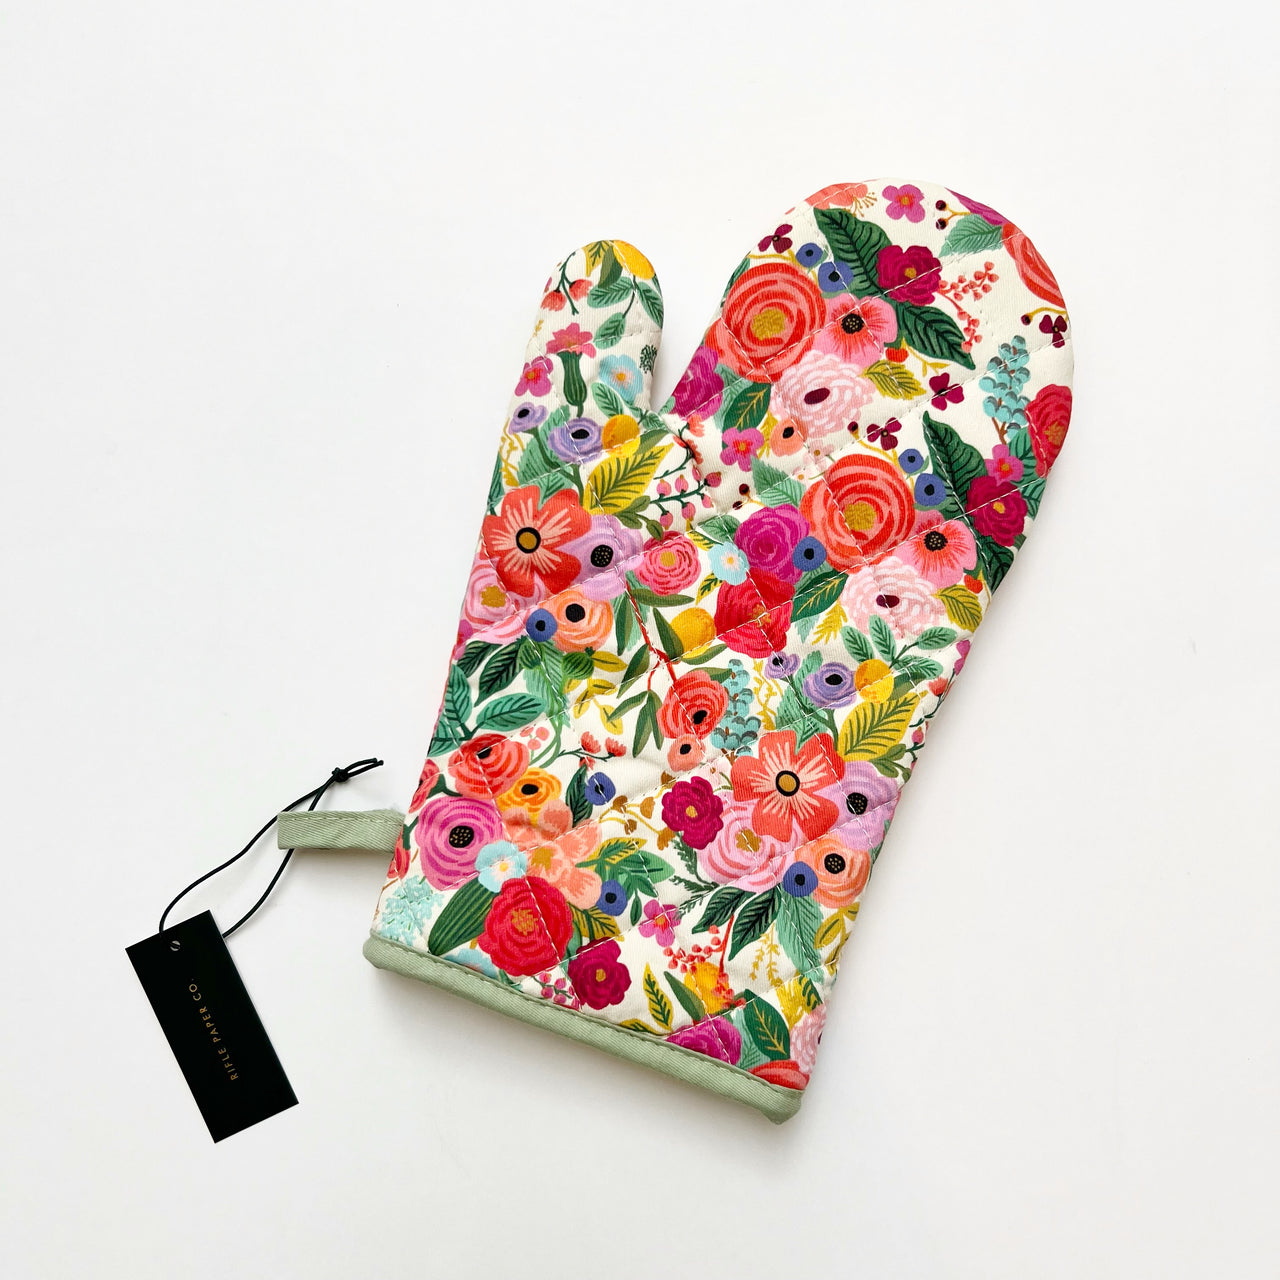 Garden Party Oven Mitt - Rifle Paper Company